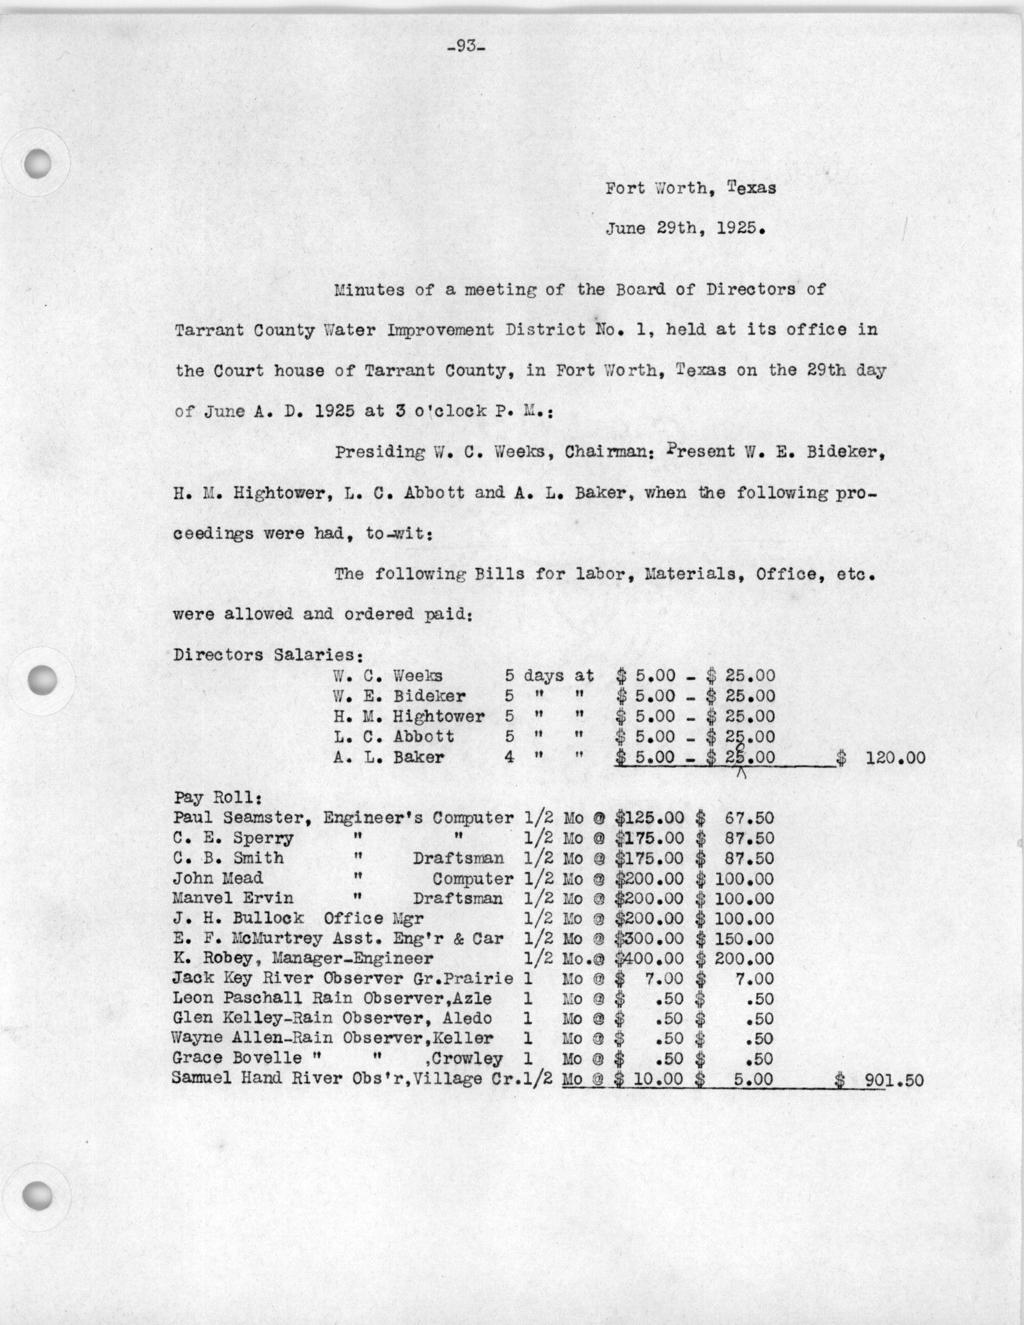 -93- Fort Worth, T e xas June 29th, 1925, Minutes of a meeting of the Board of Directors of Tarrant County Water Improvement District No.